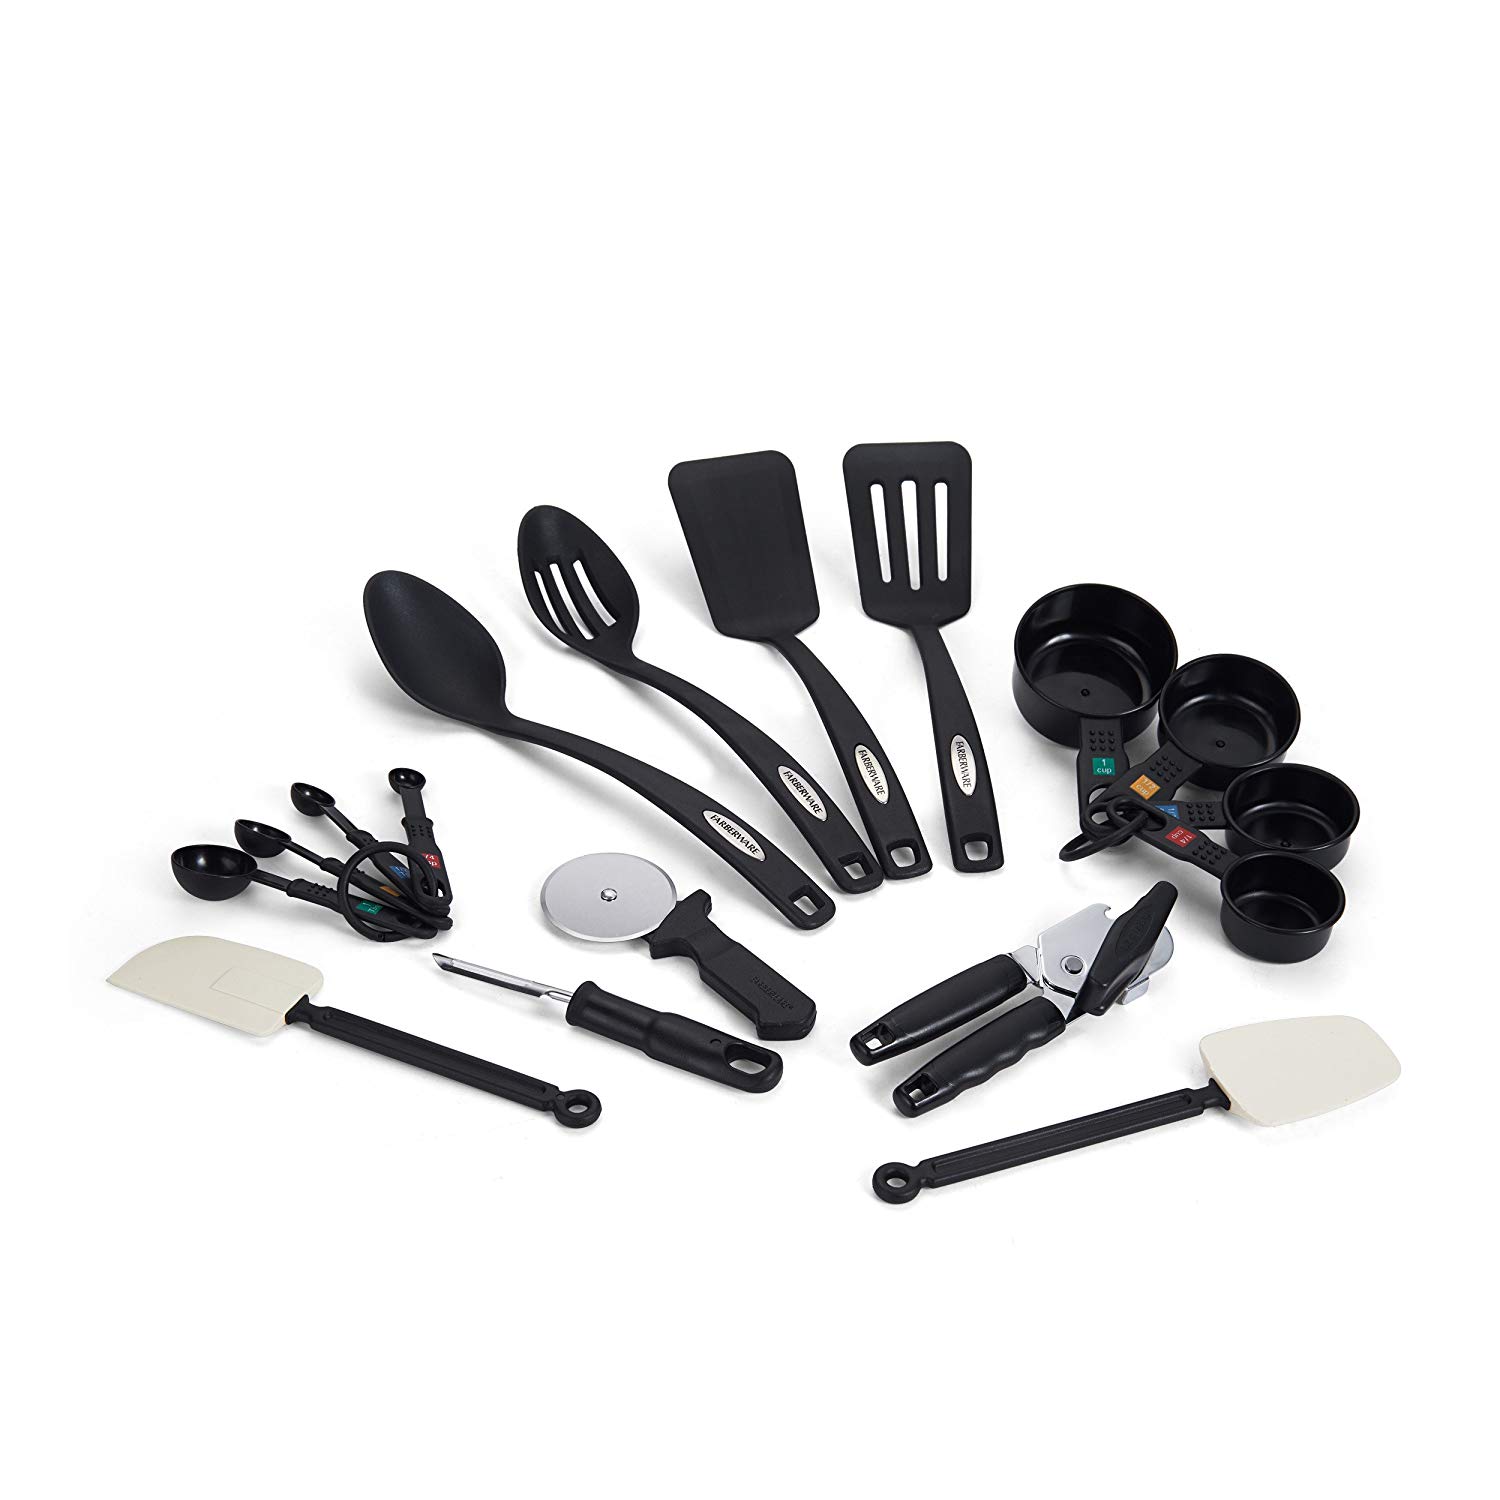 Farberware classic 17-piece tool and gadget set for $9